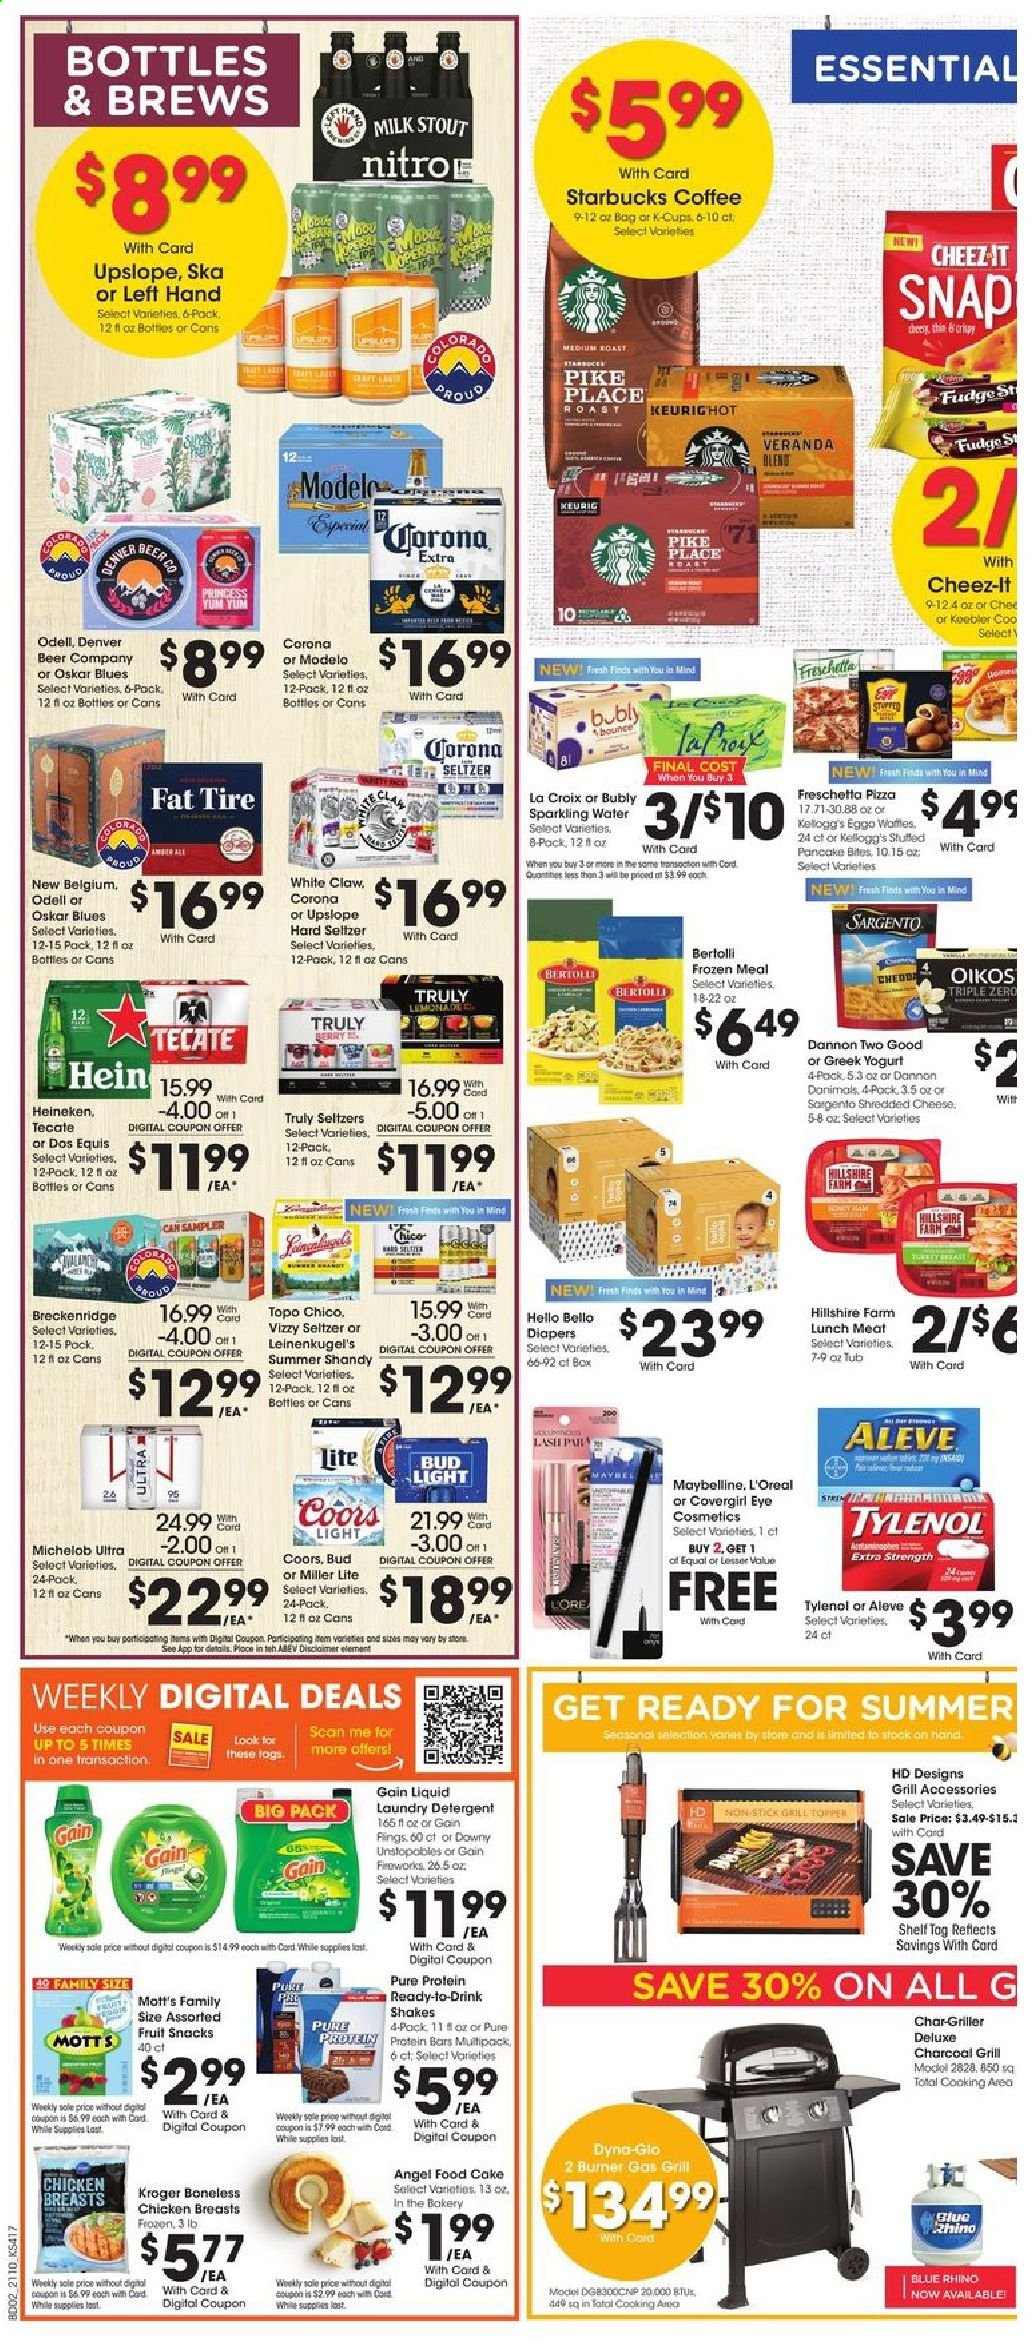 thumbnail - City Market Flyer - 04/07/2021 - 04/13/2021 - Sales products - cake, pie, Angel Food, pizza, pancakes, Bertolli, lunch meat, shredded cheese, Sargento, greek yoghurt, yoghurt, Oikos, Dannon, milk, shake, fudge, fruit snack, Cheez-It, Mott's, seltzer water, sparkling water, coffee, Starbucks, Keurig, White Claw, TRULY, beer, Miller Lite, Coors, Dos Equis, Michelob, Bud Light, Corona Extra, Heineken, Modelo, chicken breasts, nappies, detergent, Gain, laundry detergent, L’Oréal, Maybelline, princess, charcoal, Aleve, Tylenol, Leinenkugel's. Page 5.